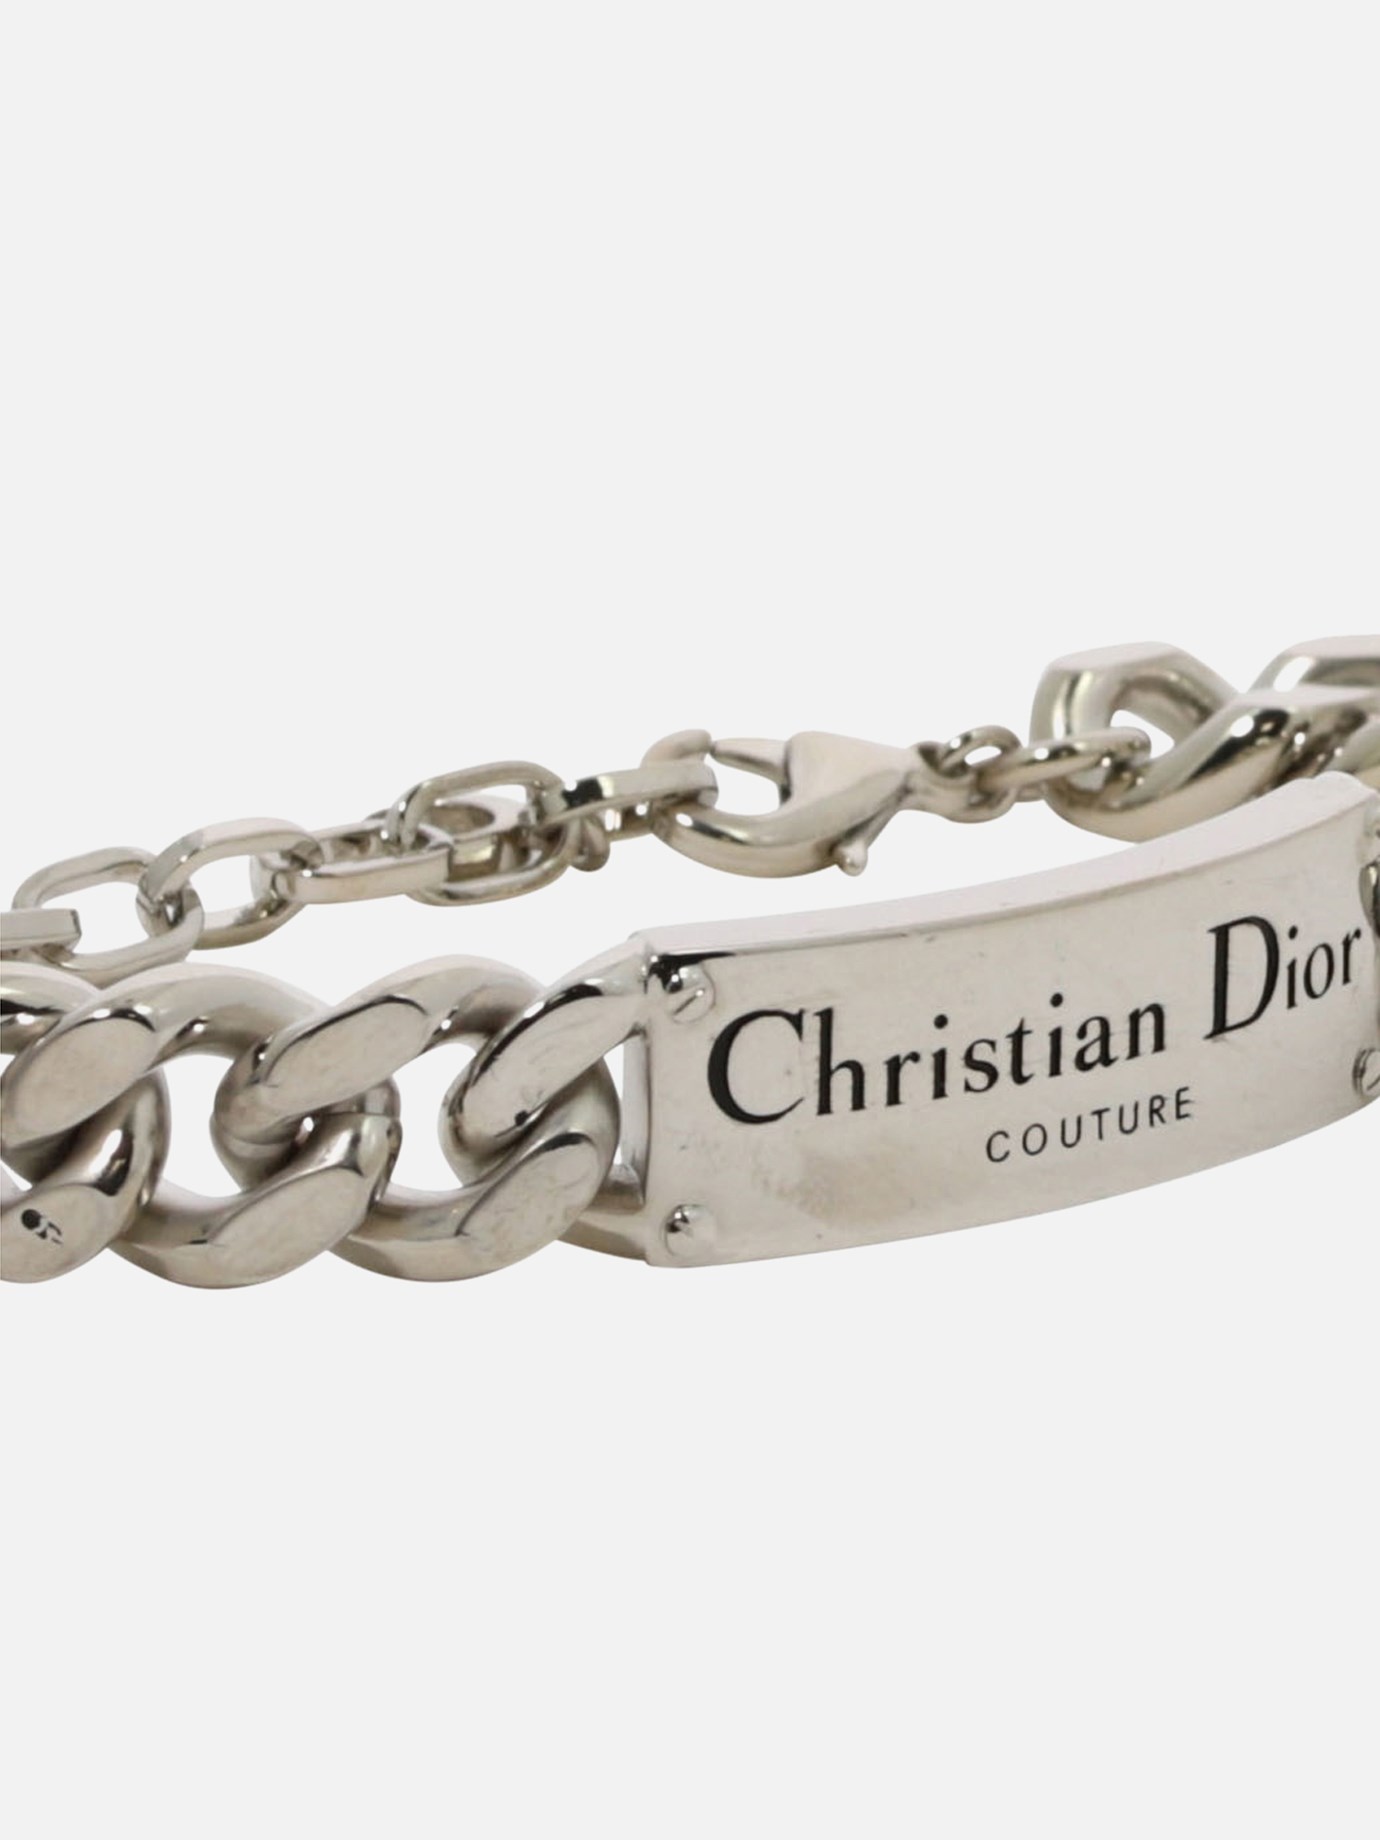 Bracciale  Christian Dior Couture  by Dior